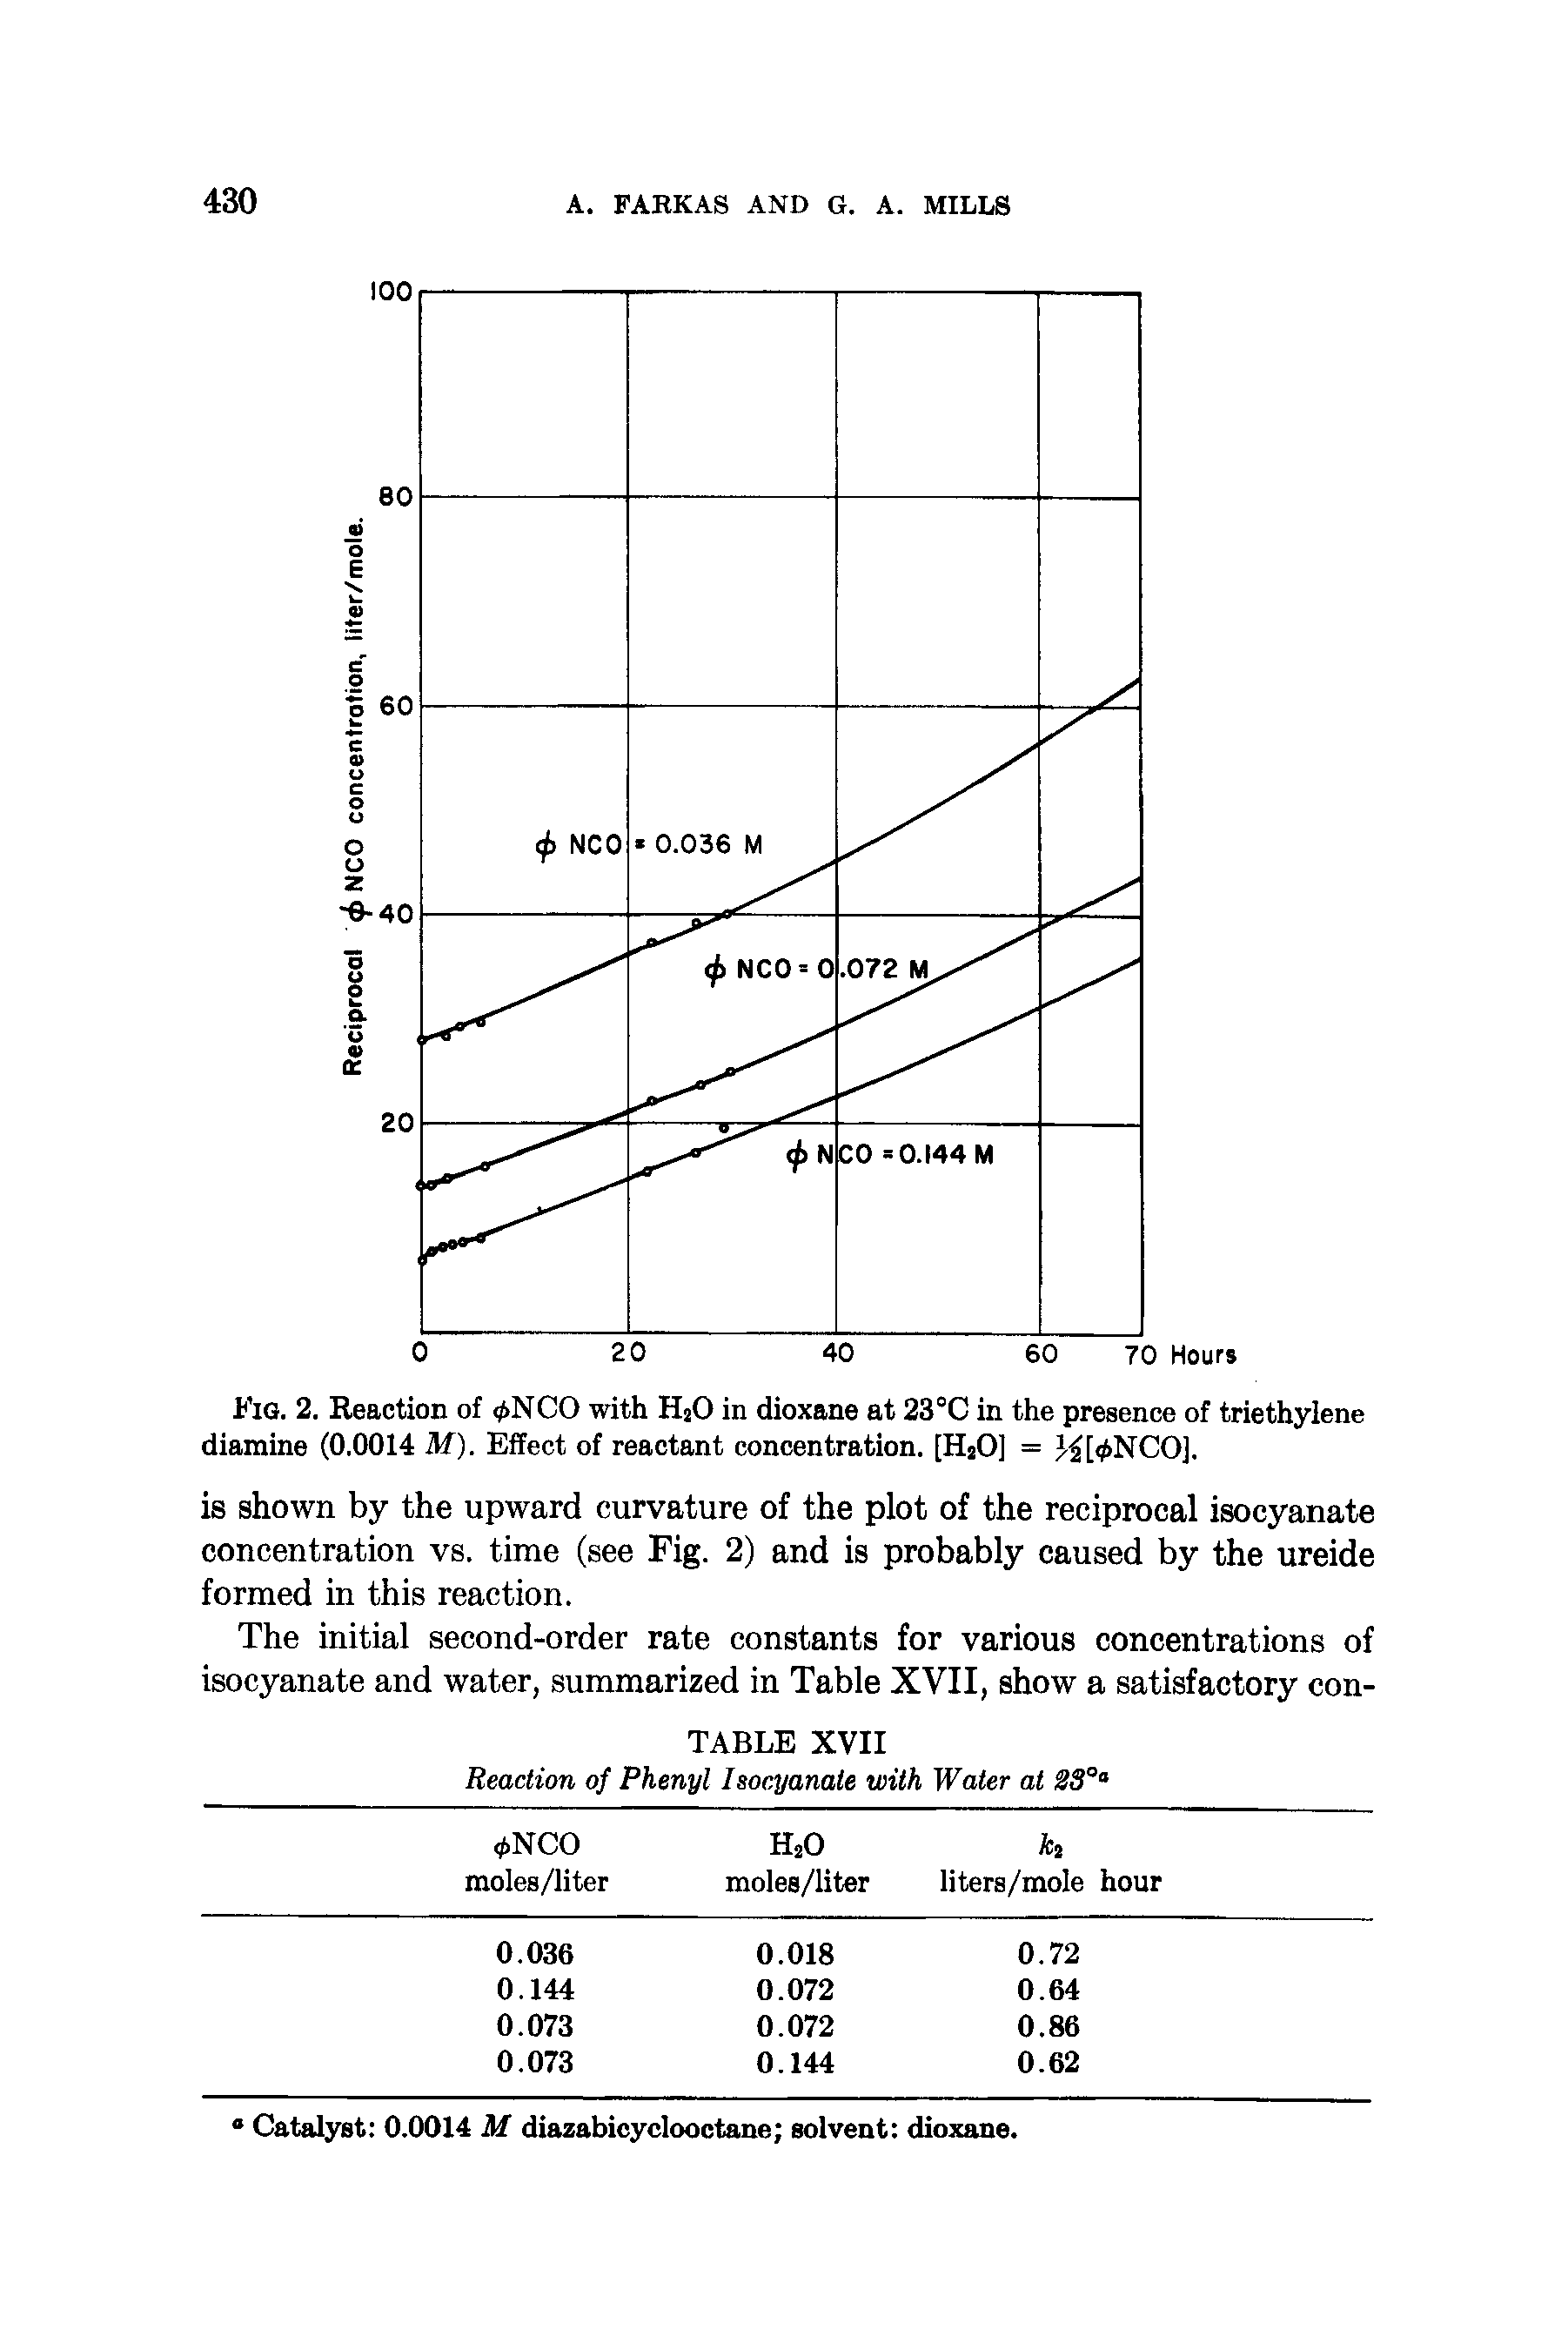 Fig. 2. Reaction of 0NCO with HjO in dioxane at 23°C in the presence of triethylene diamine (0,0014 M). Effect of reactant concentration. [HjO] = J [0NCO].